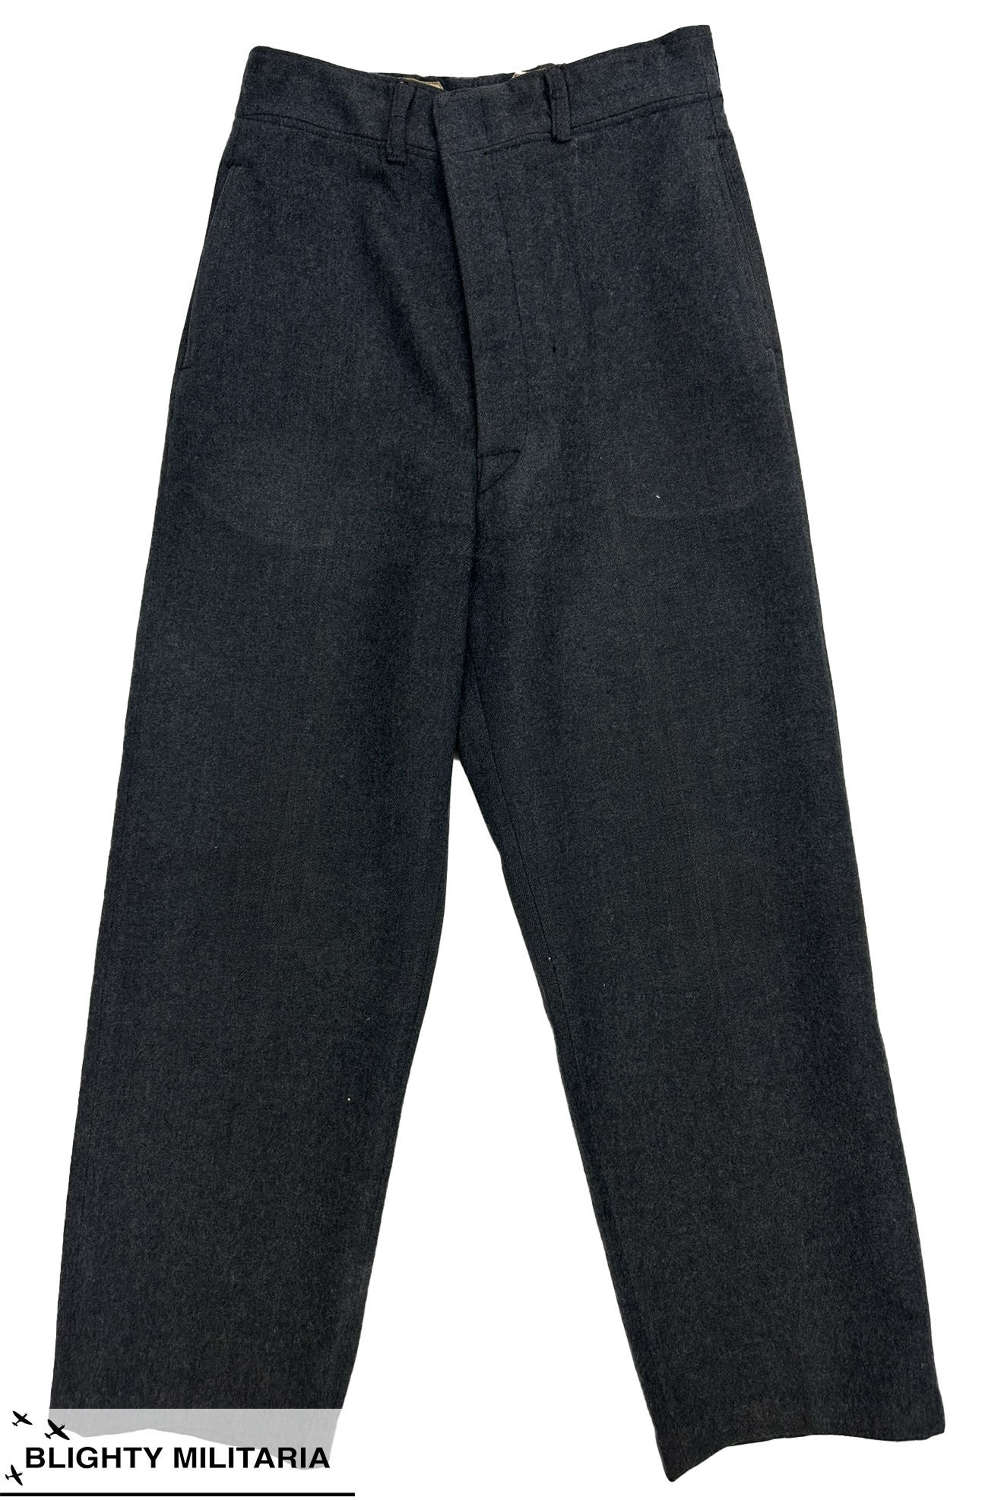 Original 1942 Dated RAF Ordinary Airman's Trousers - Attributed